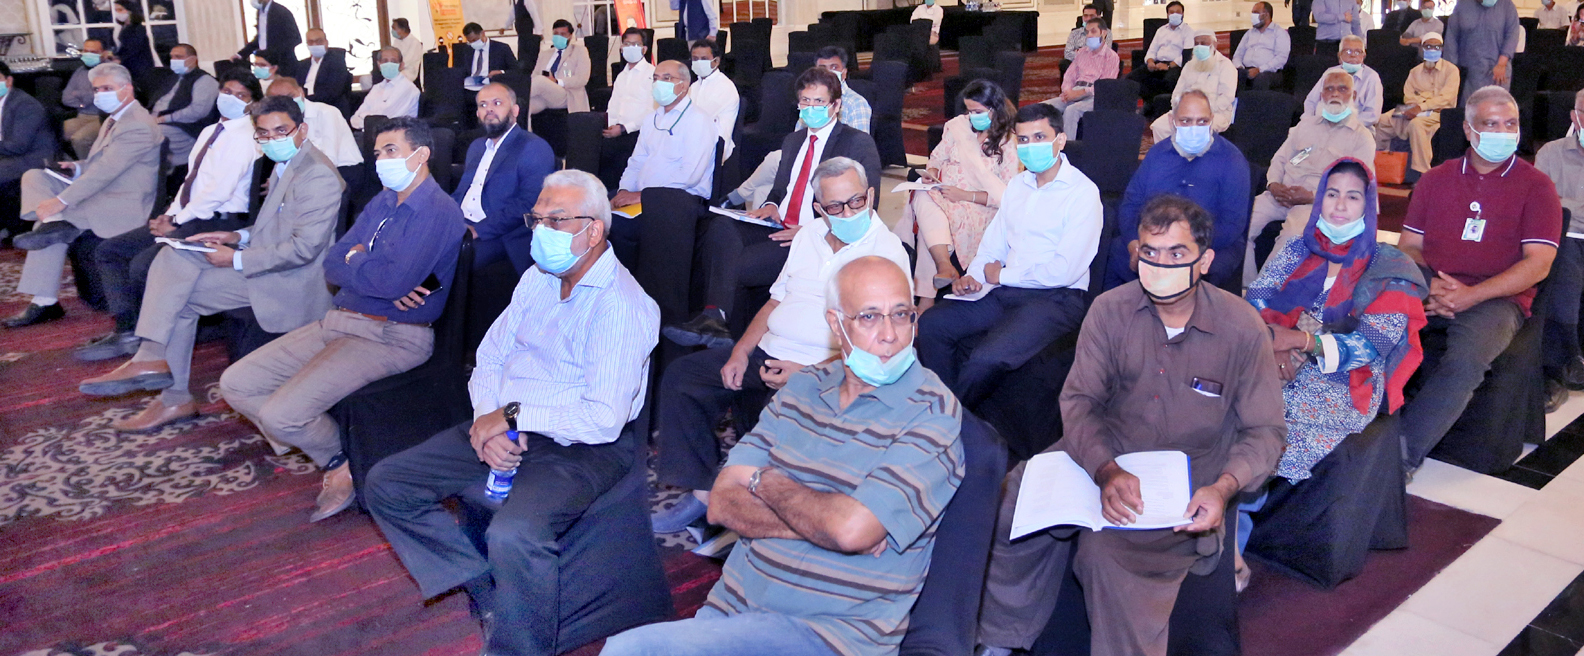 Shareholders at PPL’s 69th Annual General Meeting in October 2020 Karachi